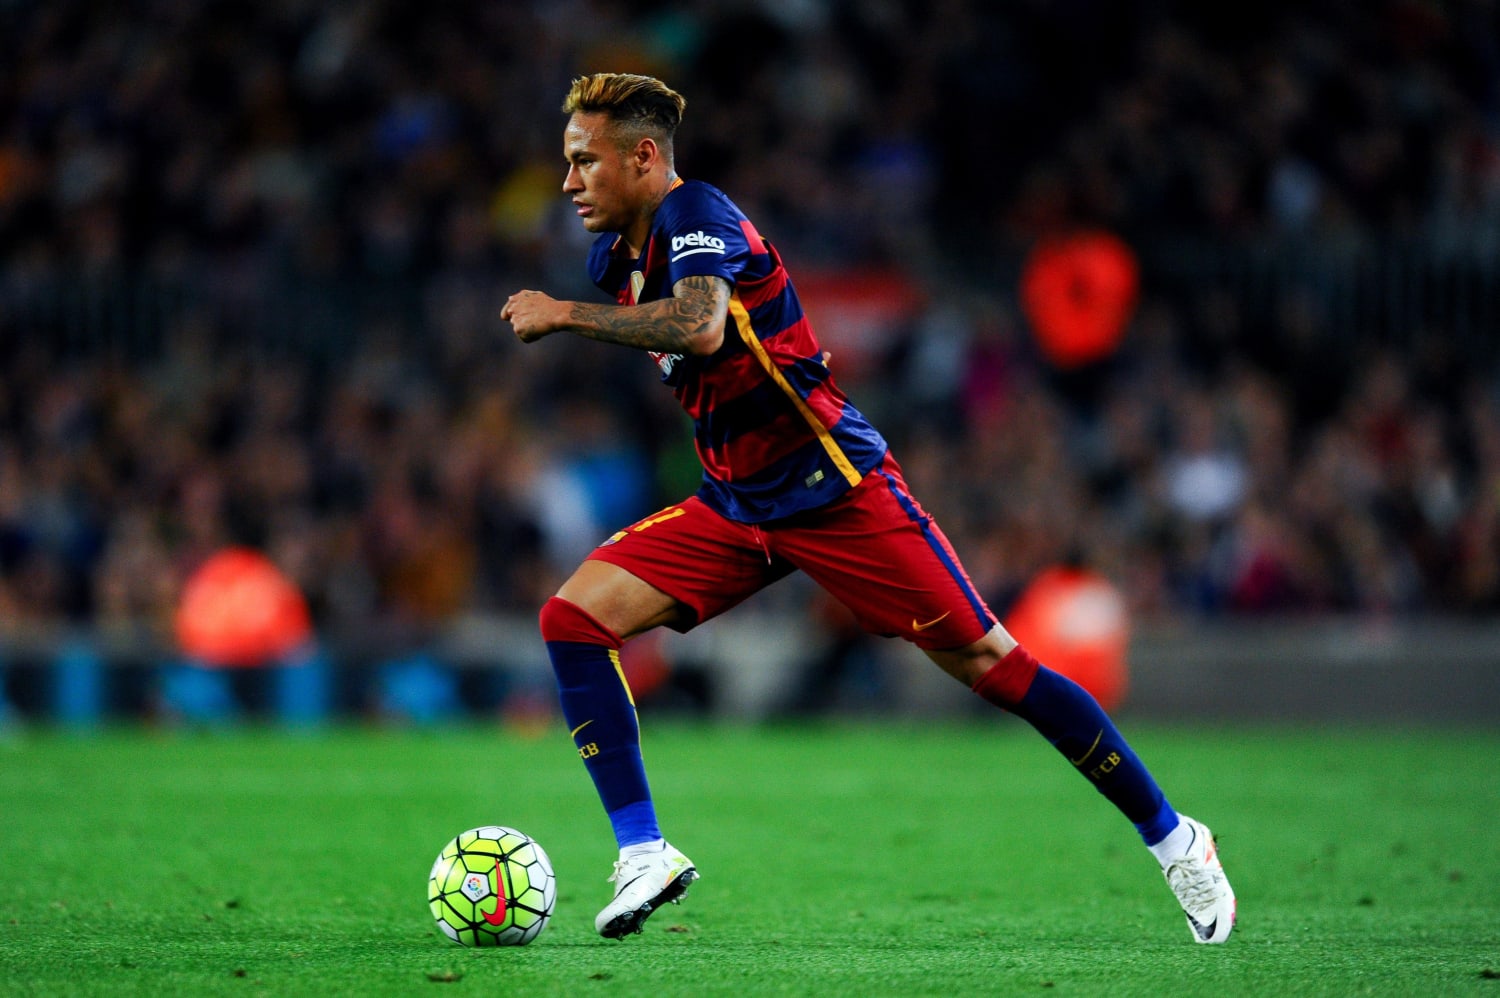  Neymar Jr. in action during a soccer match between FC Barcelona and Valencia CF at Camp Nou stadium in 2015.